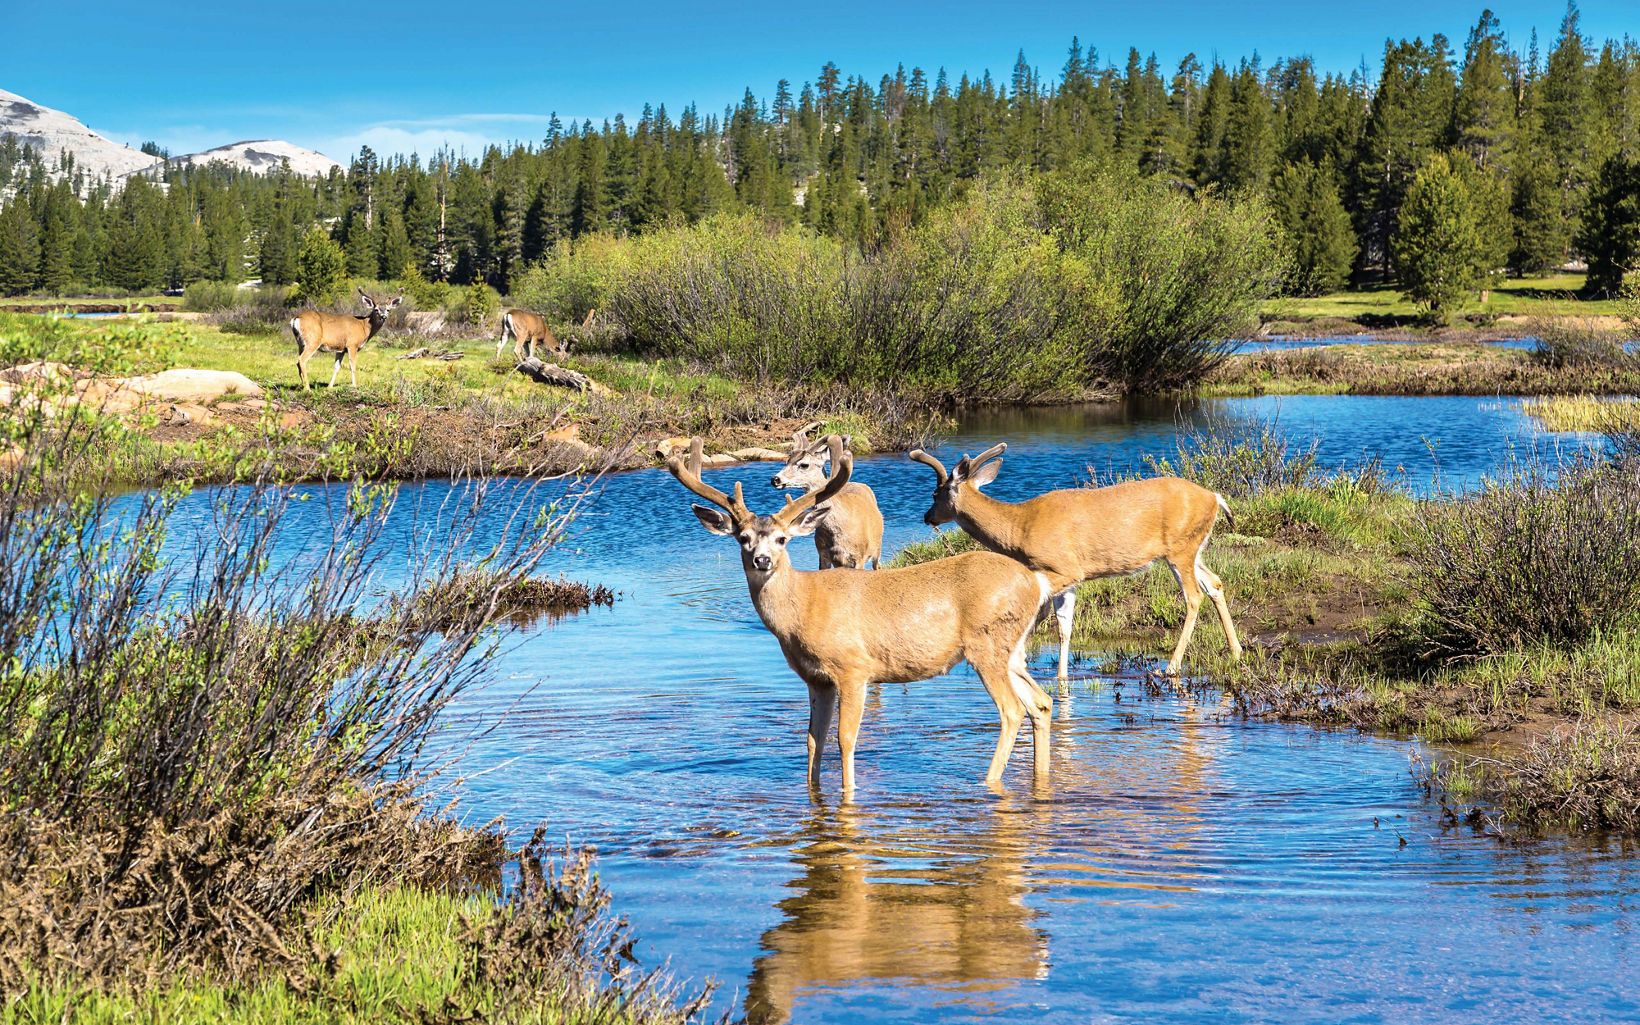 Two adult brown deer wade in a stream close to the bank, with 2 more deer in the background on land. Conifers and mountains are in the background.